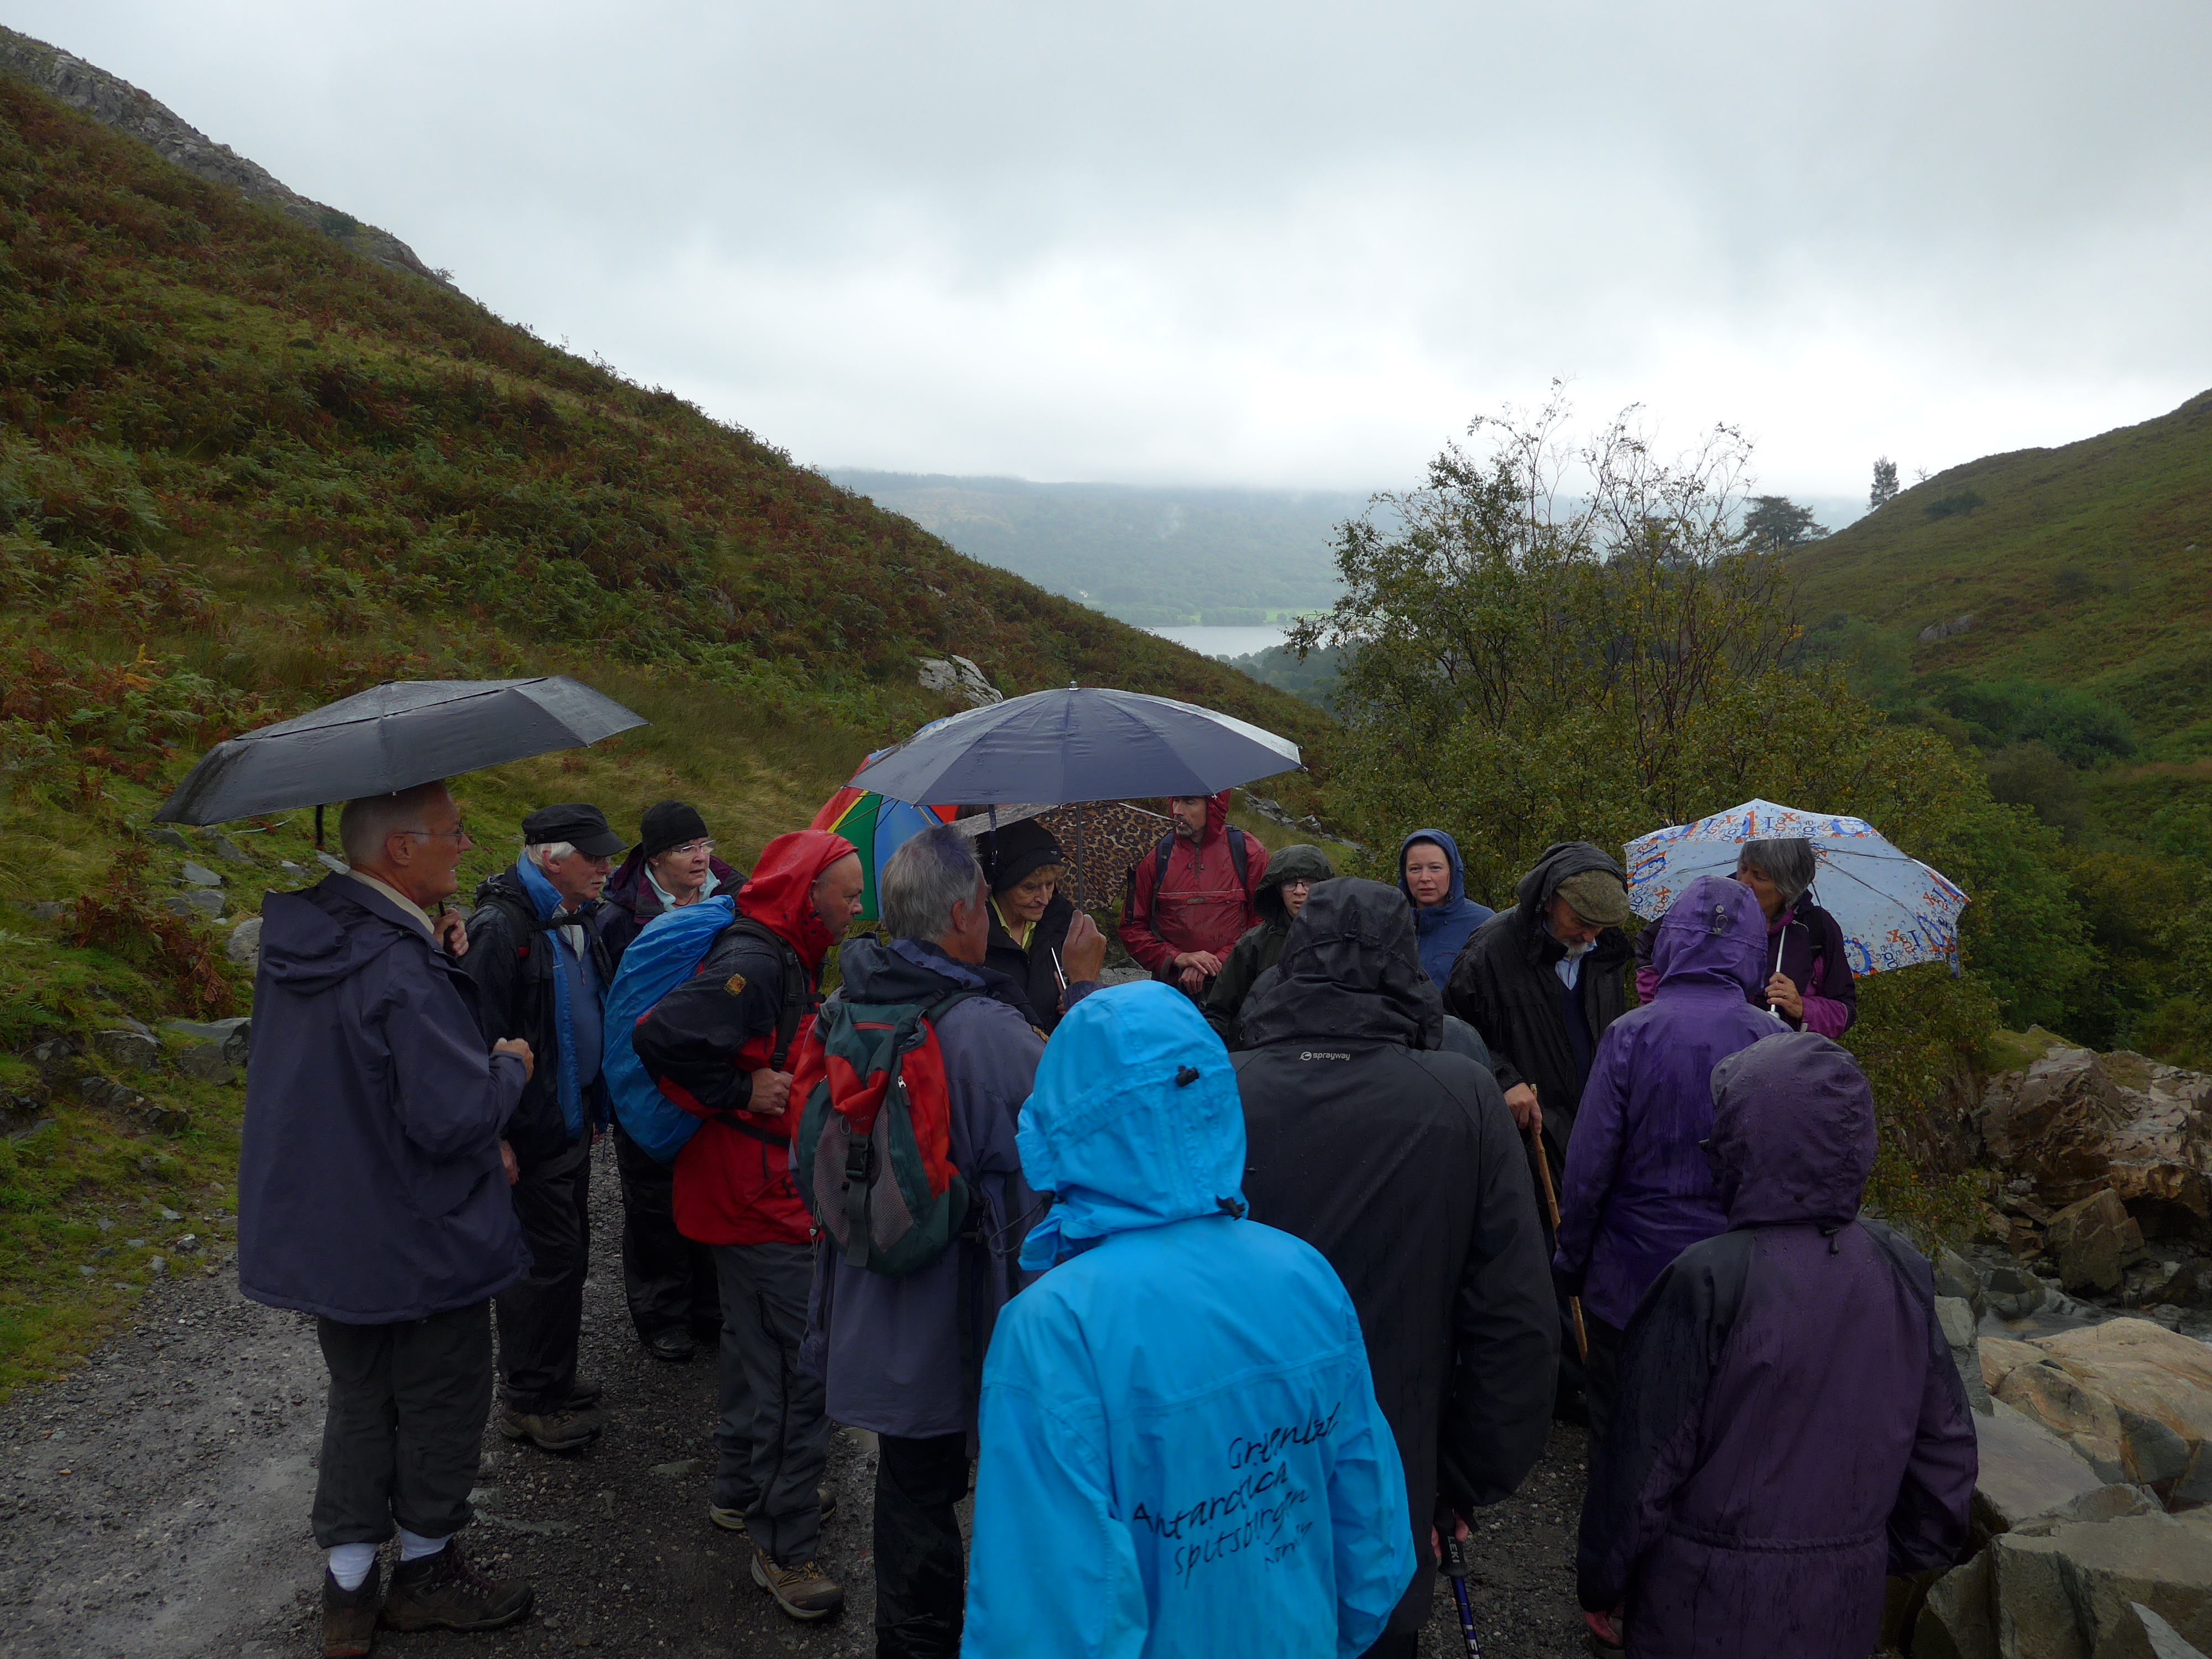 On a Guided Walk at Coniston